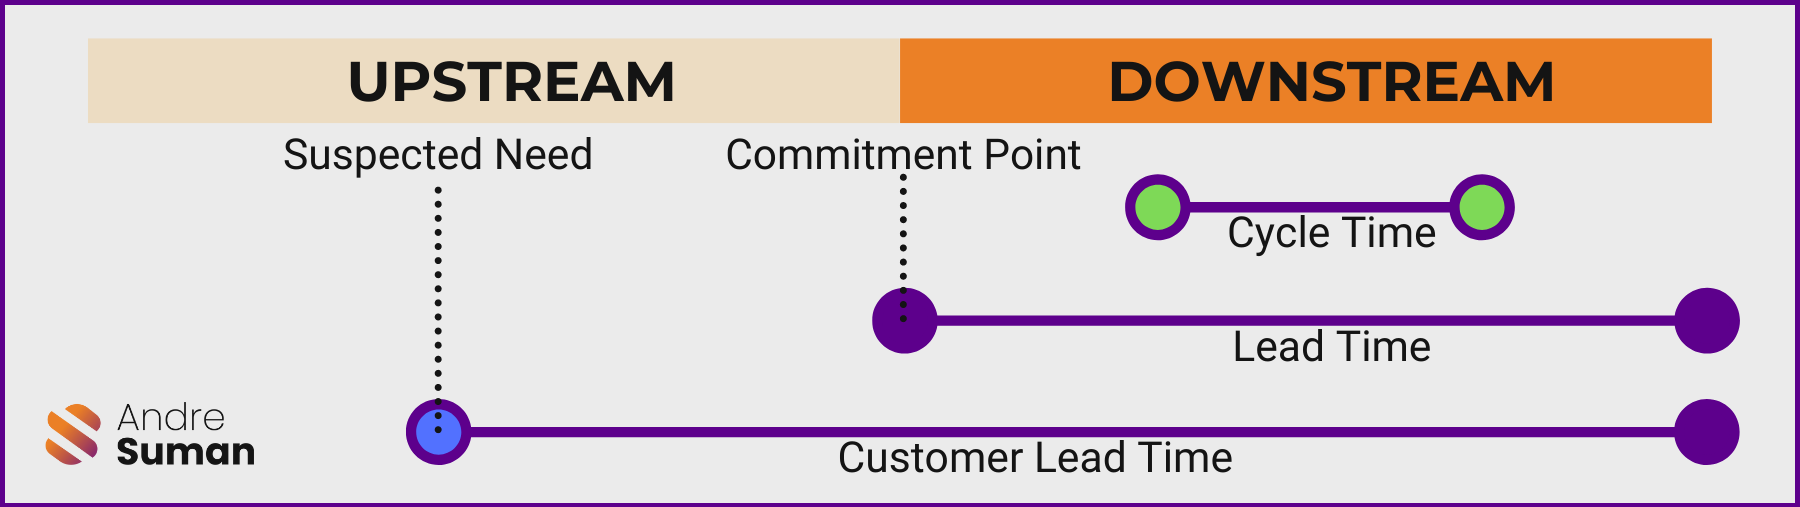 Lead Time, Cycle Time e Customer Lead Time